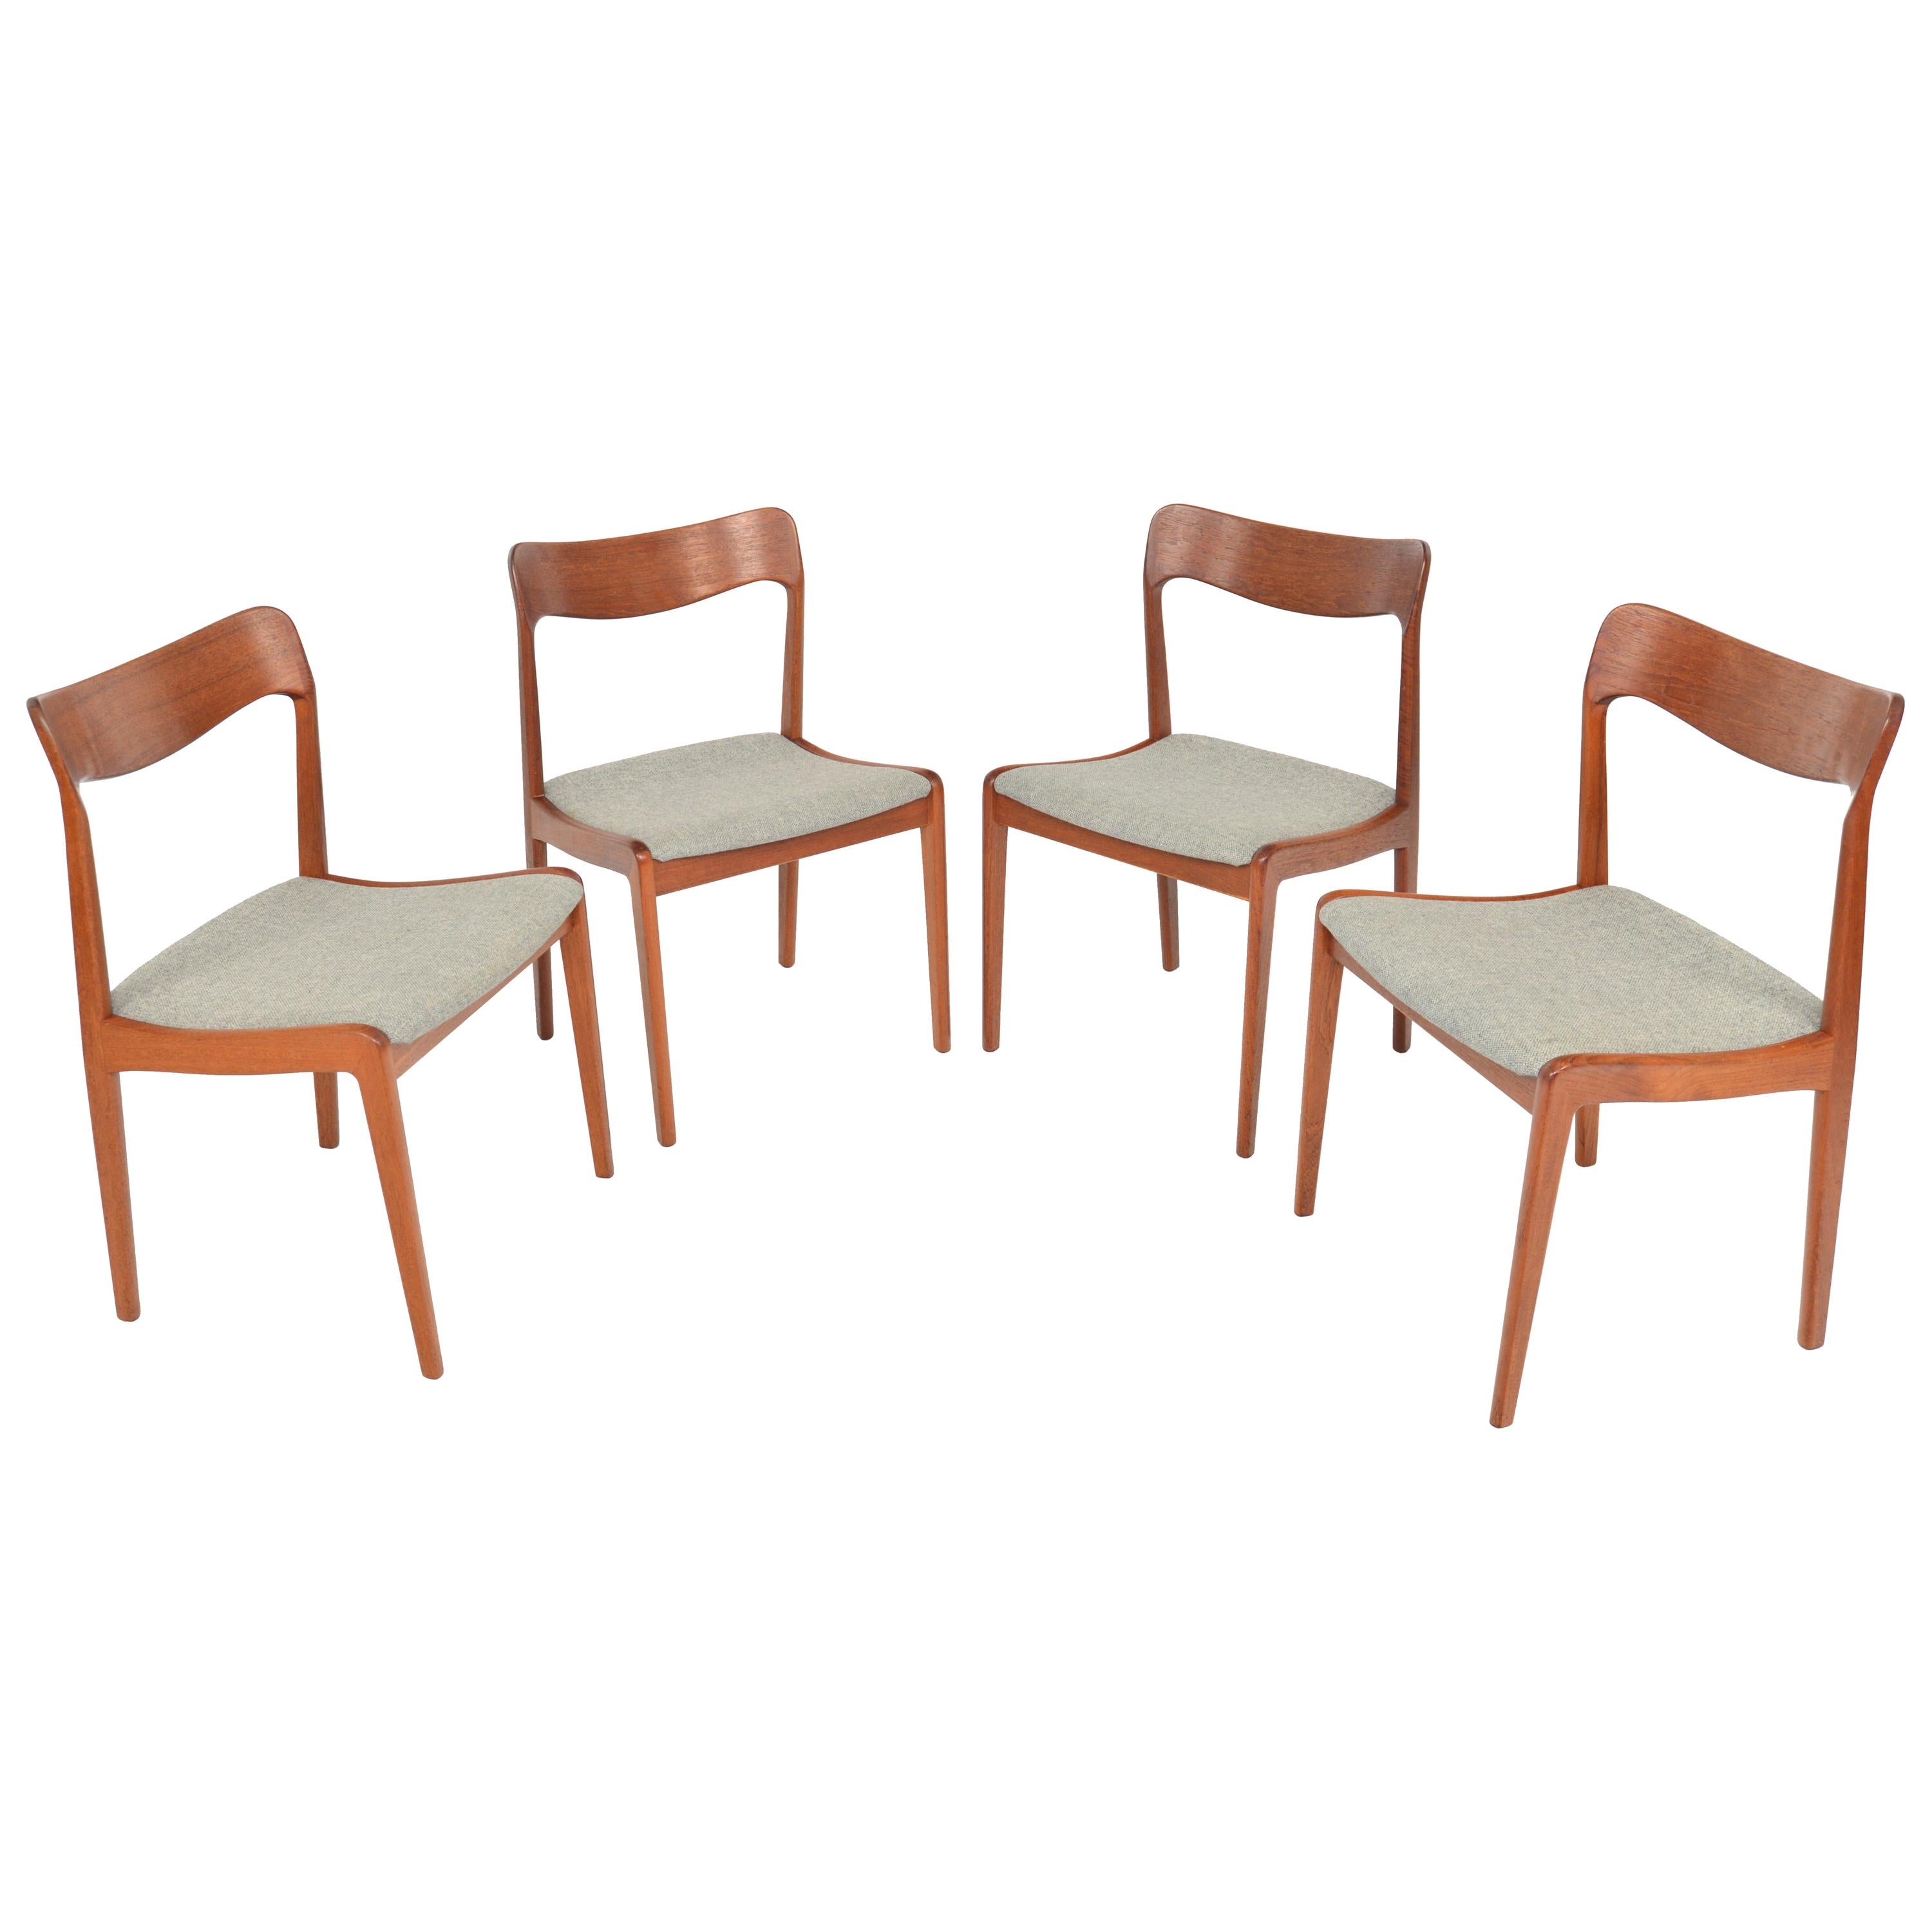 Set of Four Danish Modern Dining Chairs in Teak